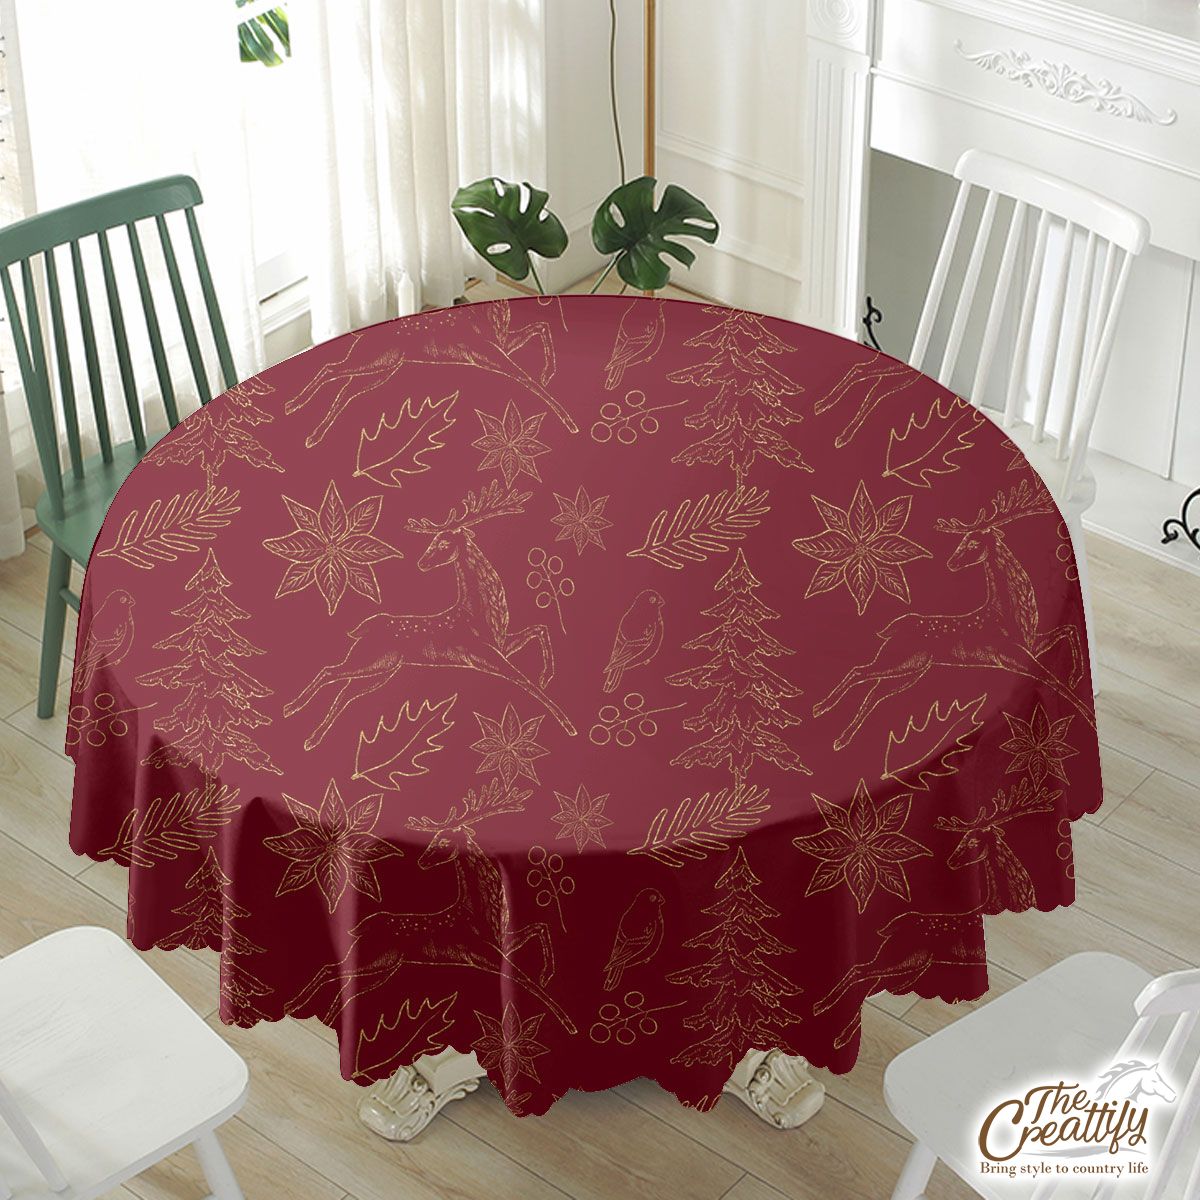 Poinsettia, Deer And Holly Leaf Pattern Waterproof Tablecloth